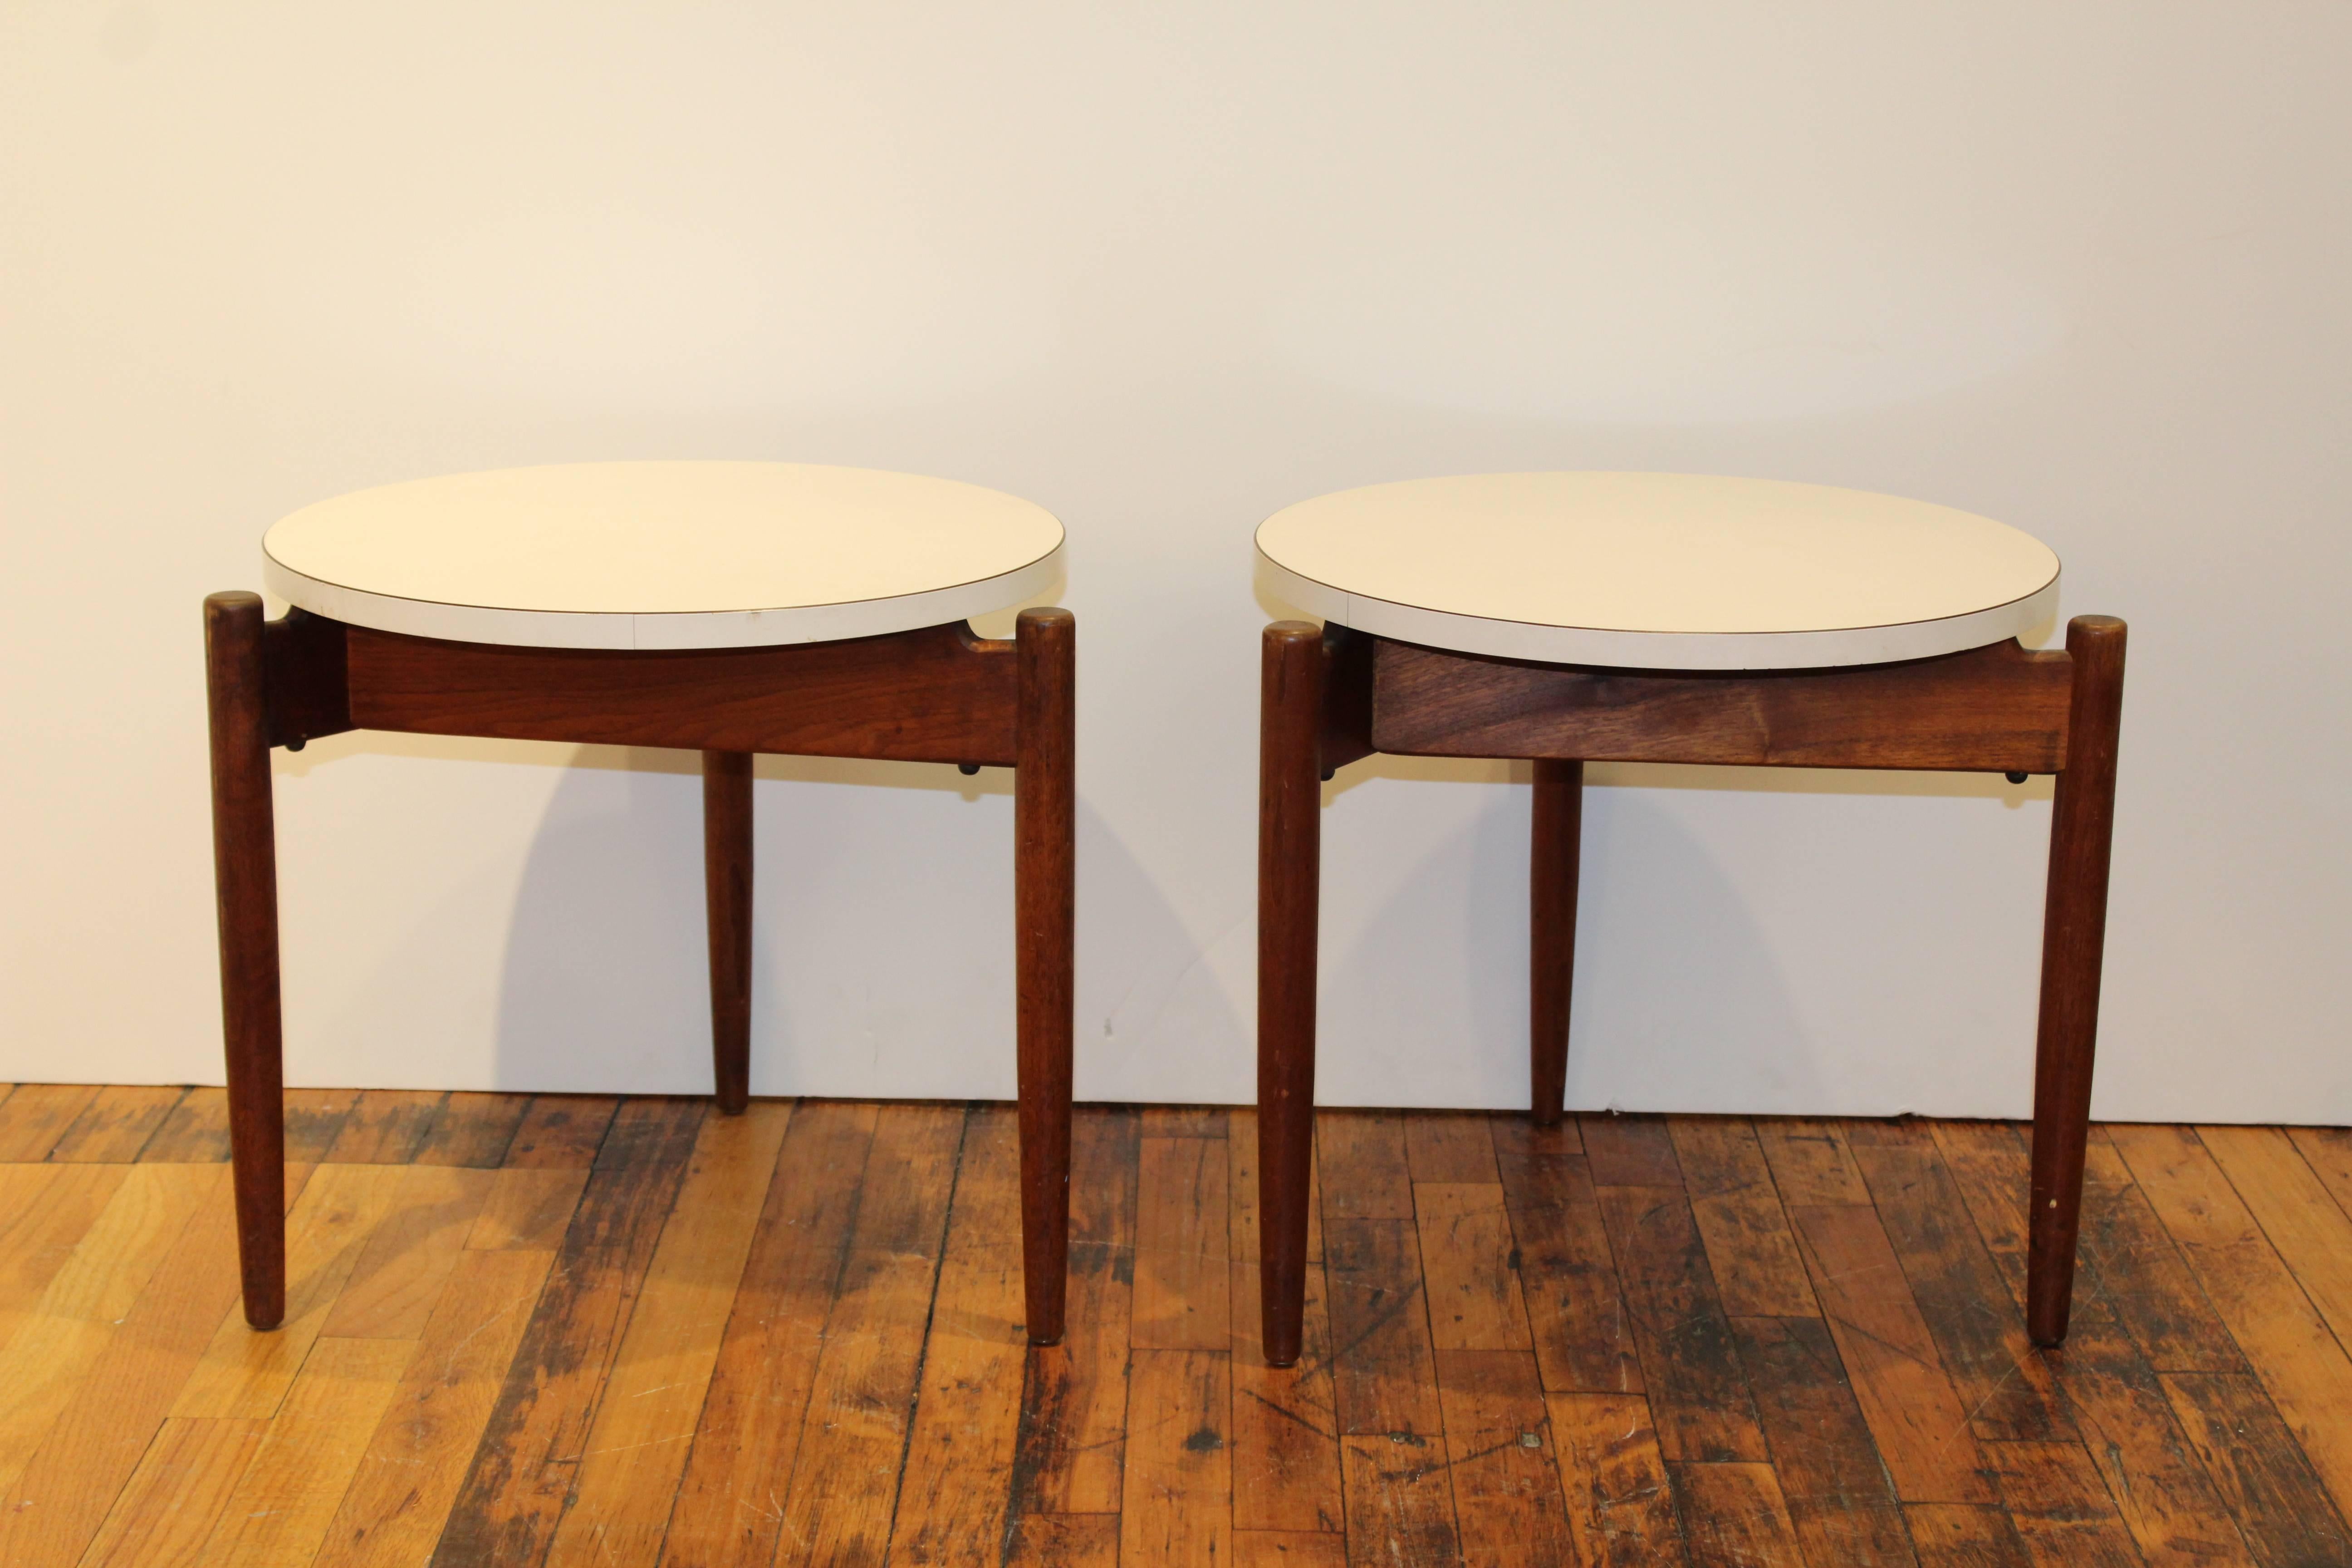 Pair of floating nesting tables by Jens Risom. Styled with circular white tops and teak tripod legs. 

110478